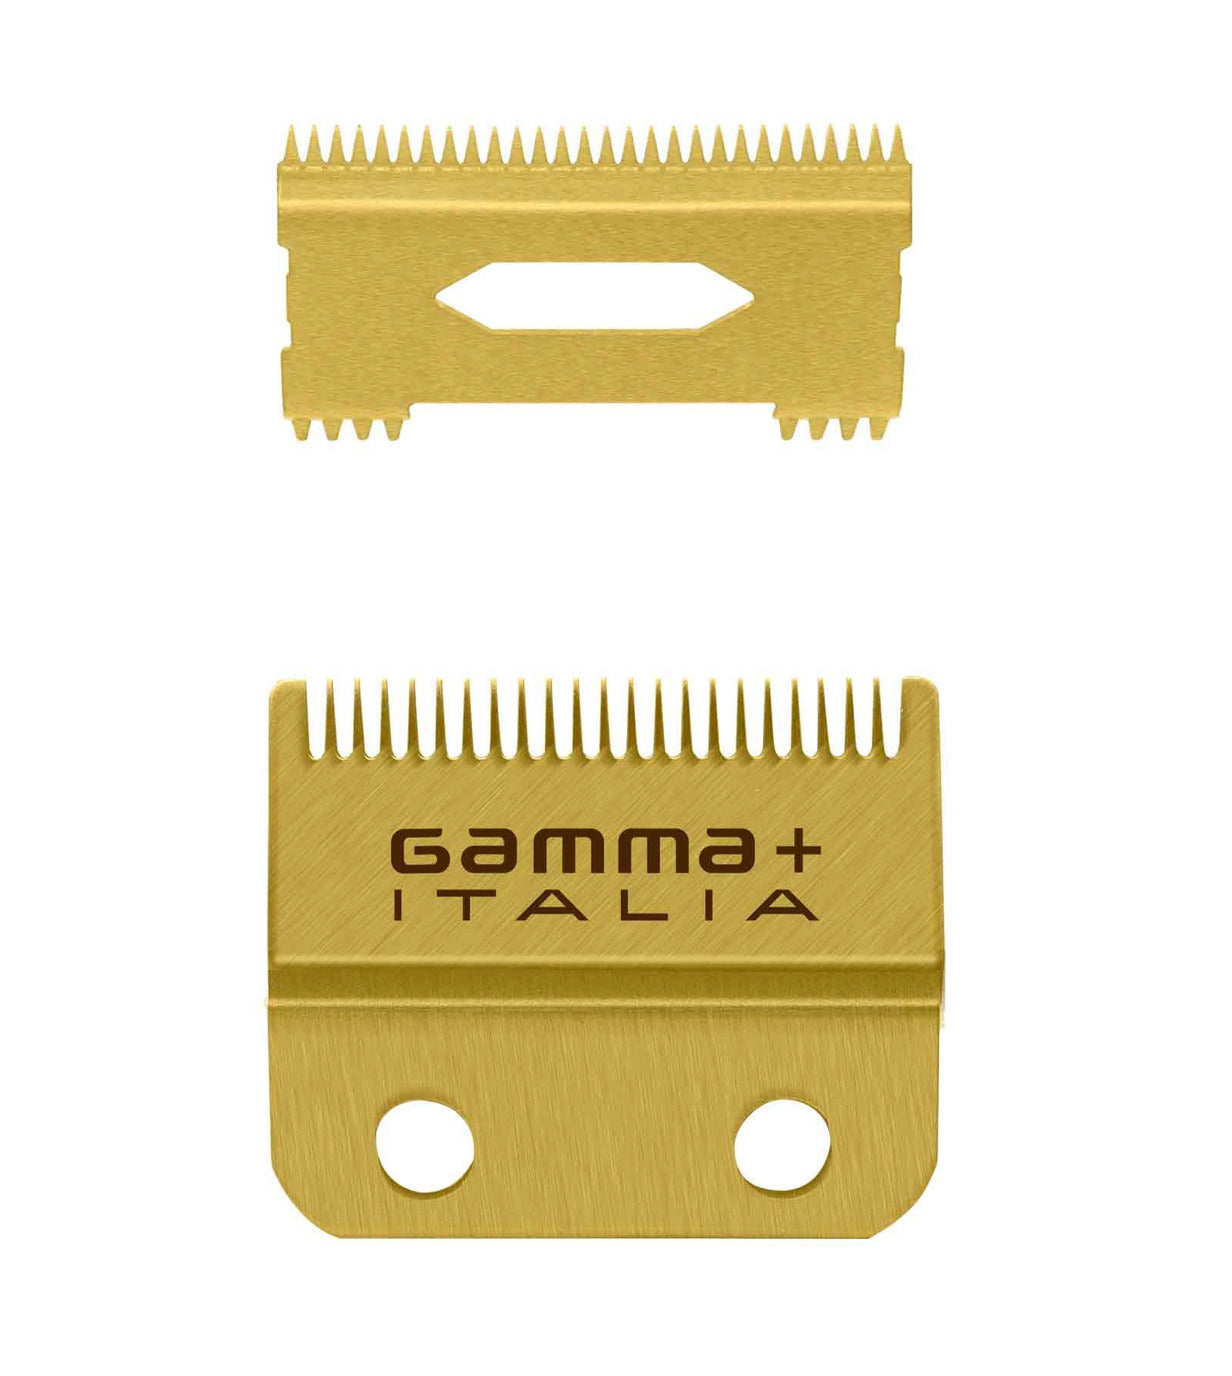 Gamma+ REPLACEMENT FIXED GOLD TITANIUM FADE CLIPPER BLADE WITH GOLD TITANIUM MOVING SLIM DEEP TOOTH CUTTER SET